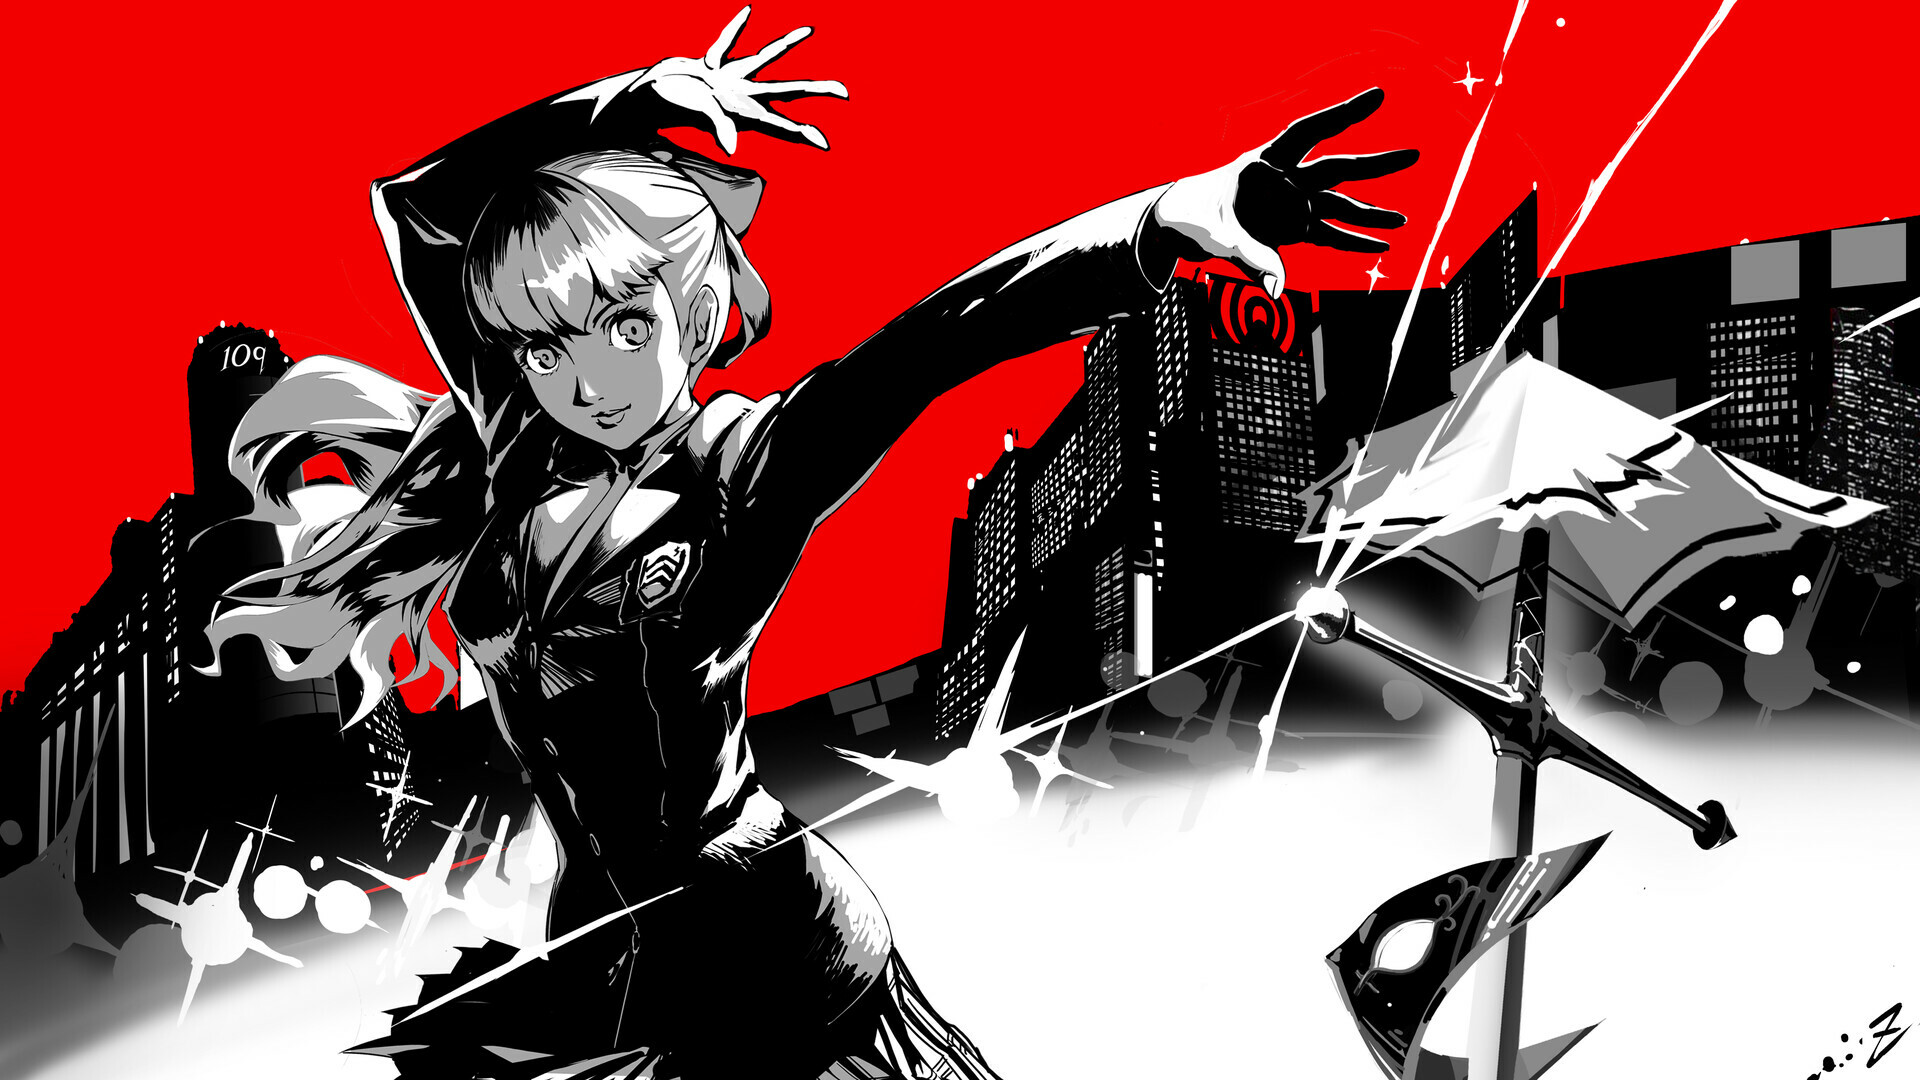 We're Getting a Persona 5 Co-Op Game Next Year | EarlyGame